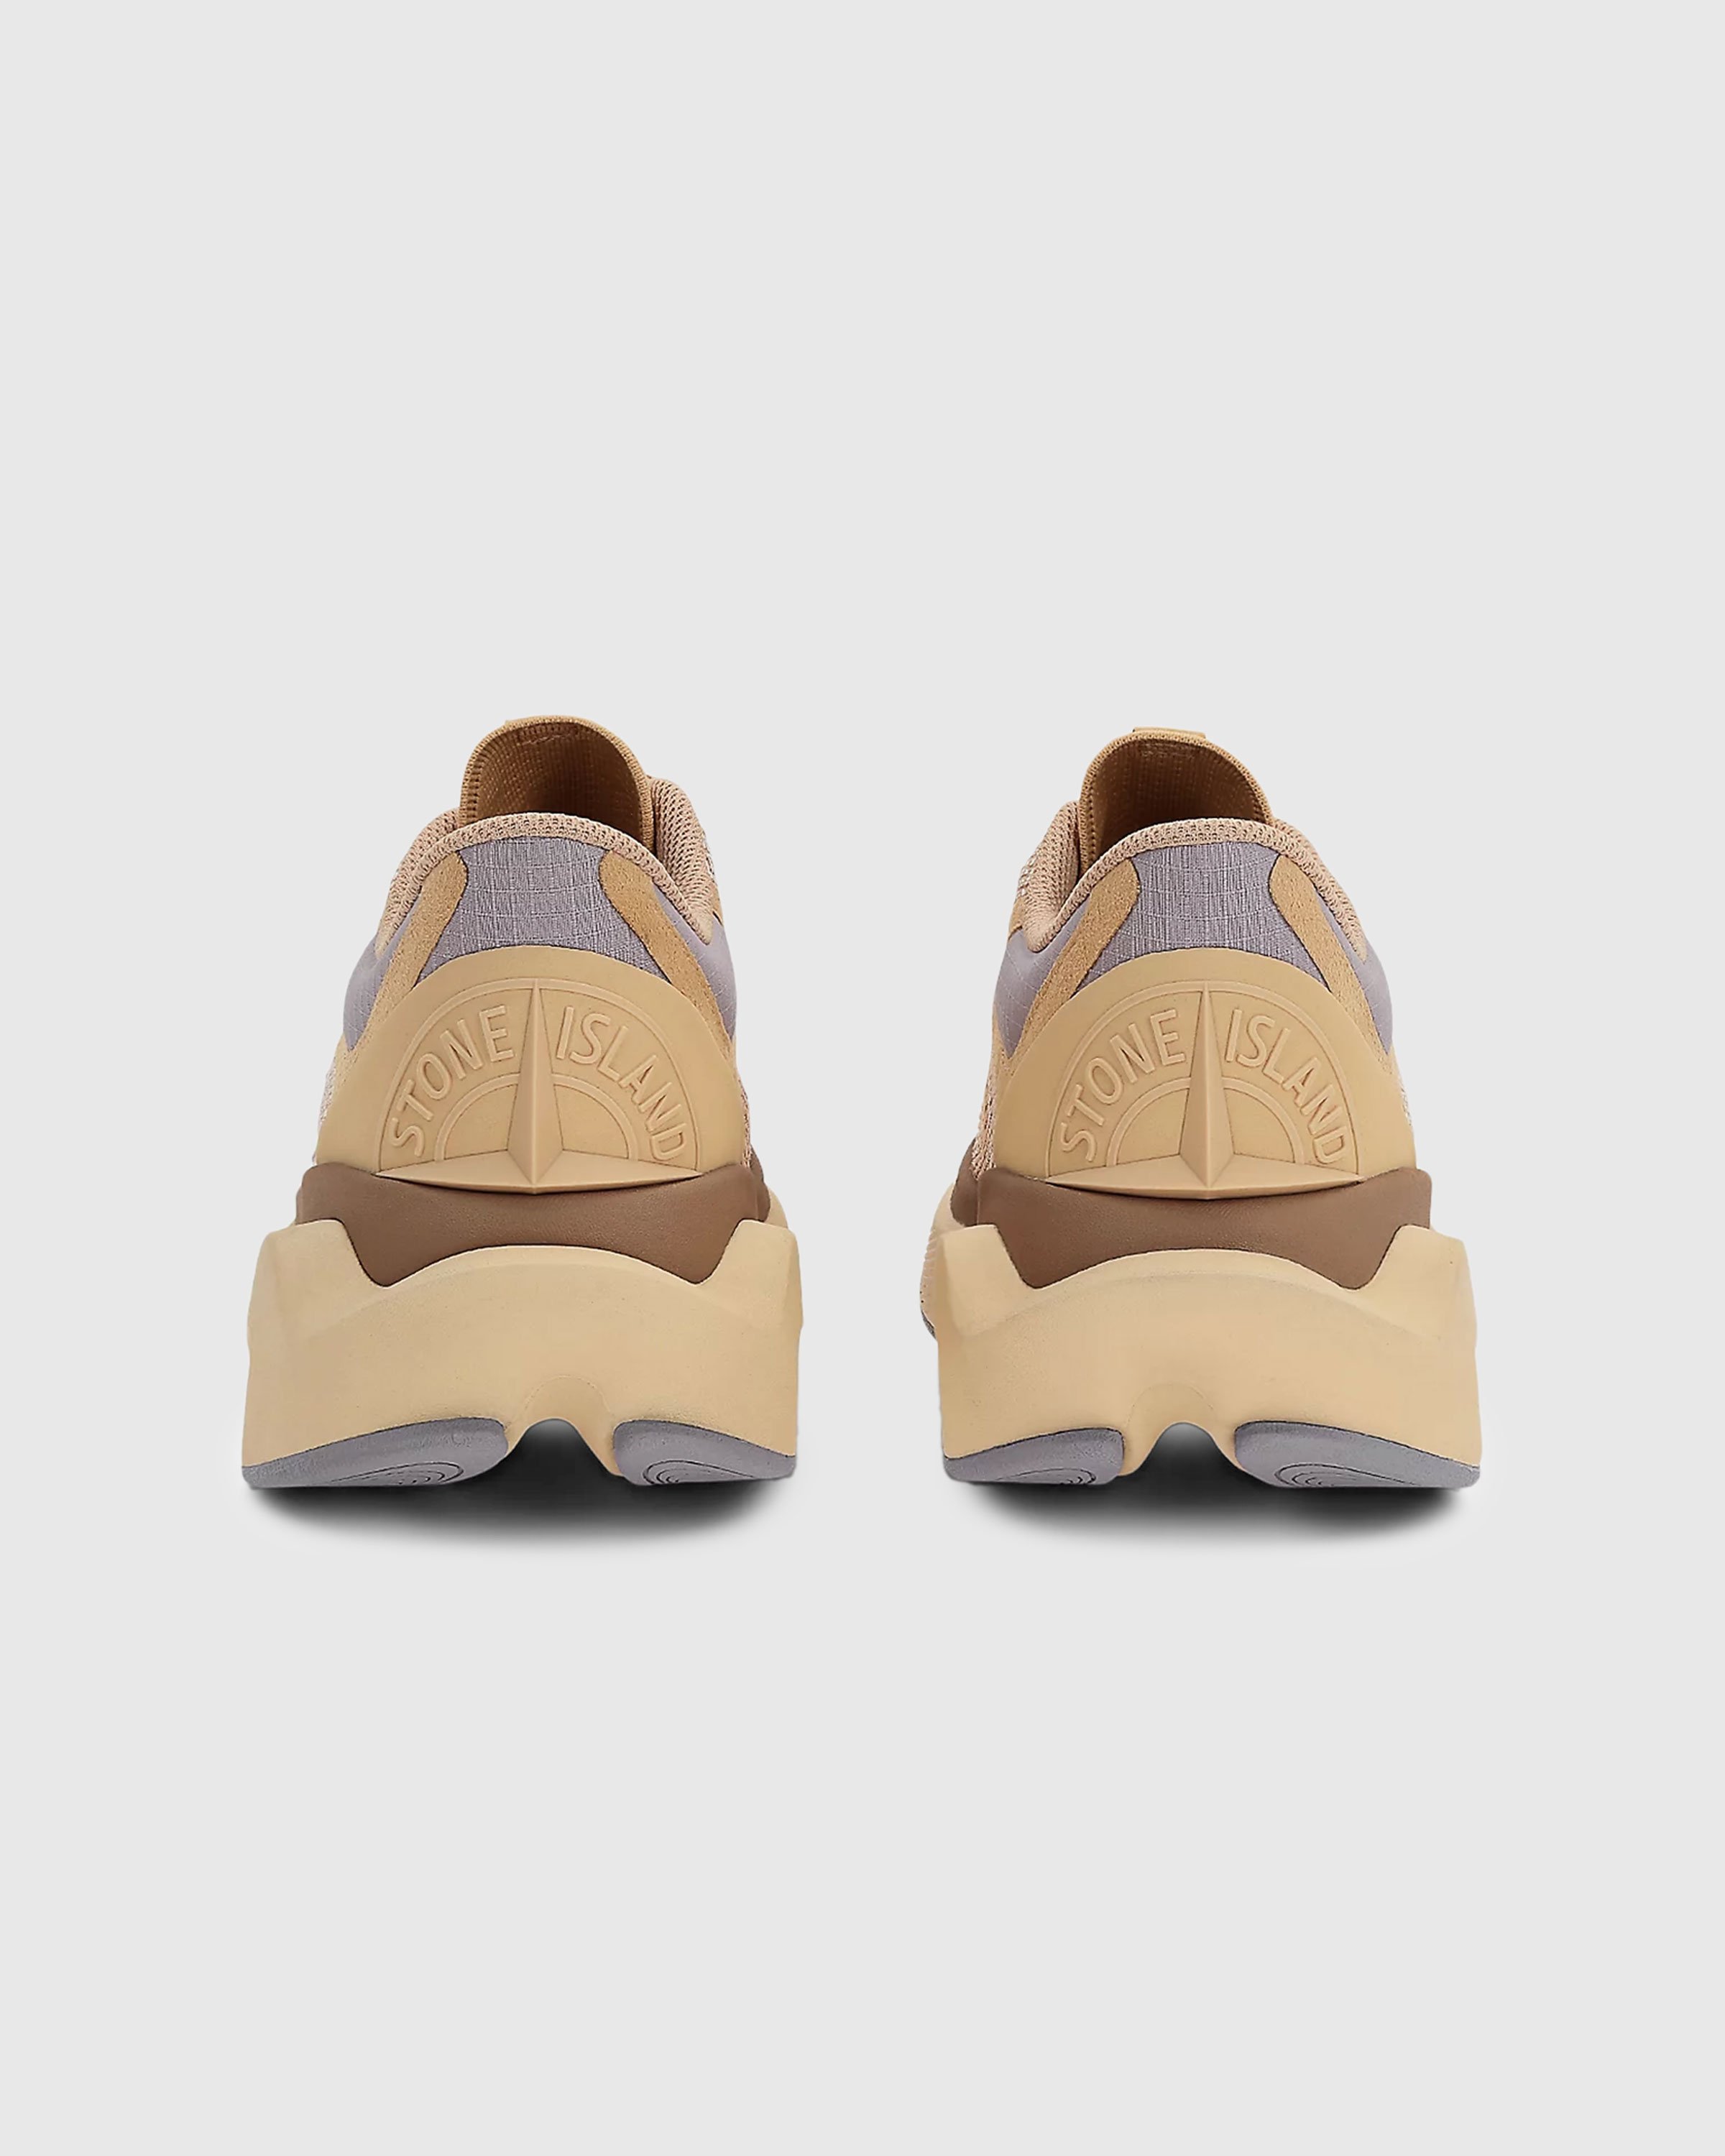 New Balance x Stone Island - TDS FuelCell C_1 Tan/Brown/Grey - Footwear - Brown - Image 4